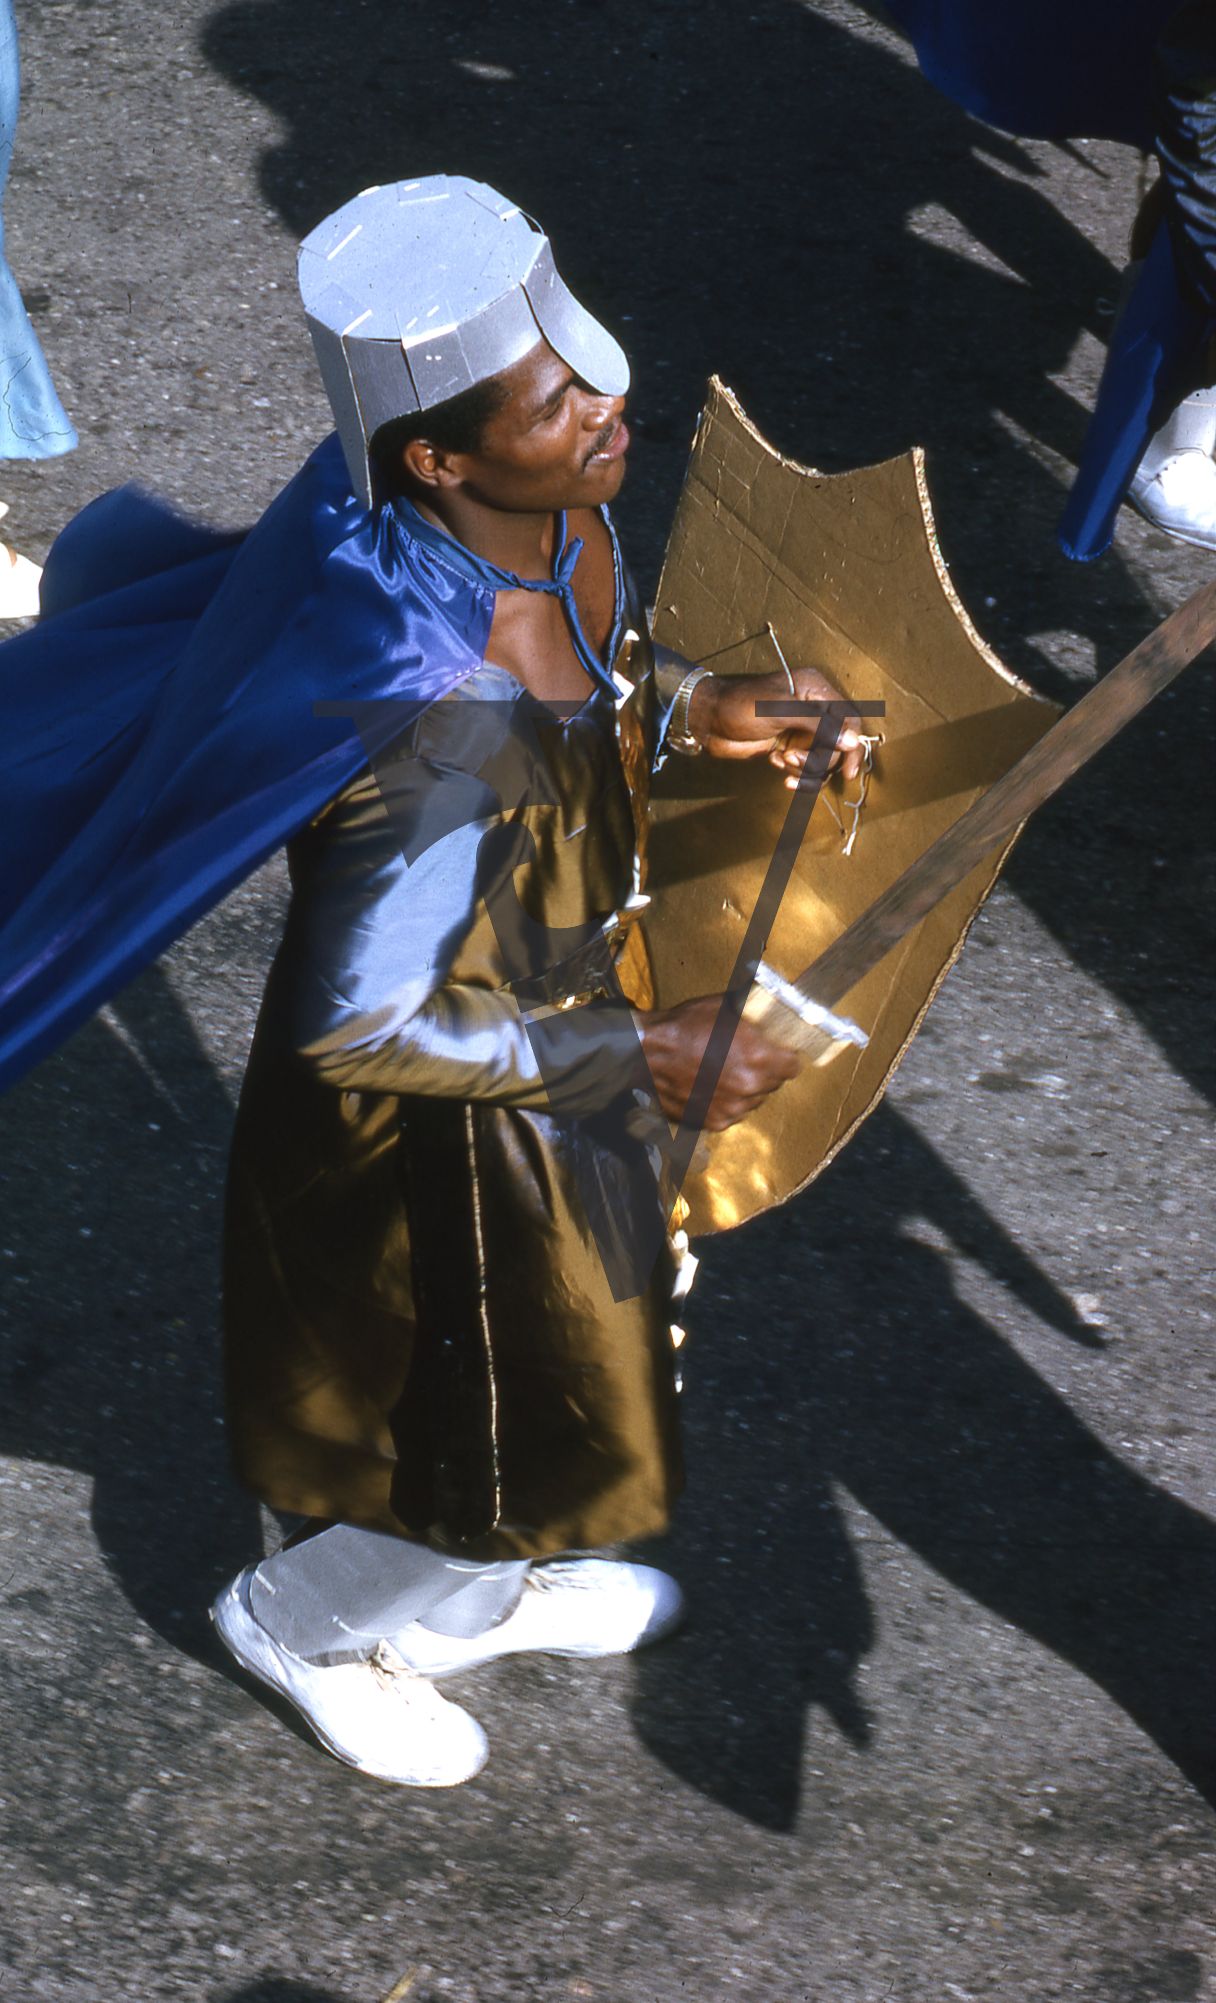 Jamaica, Man at carnival in knight costume.